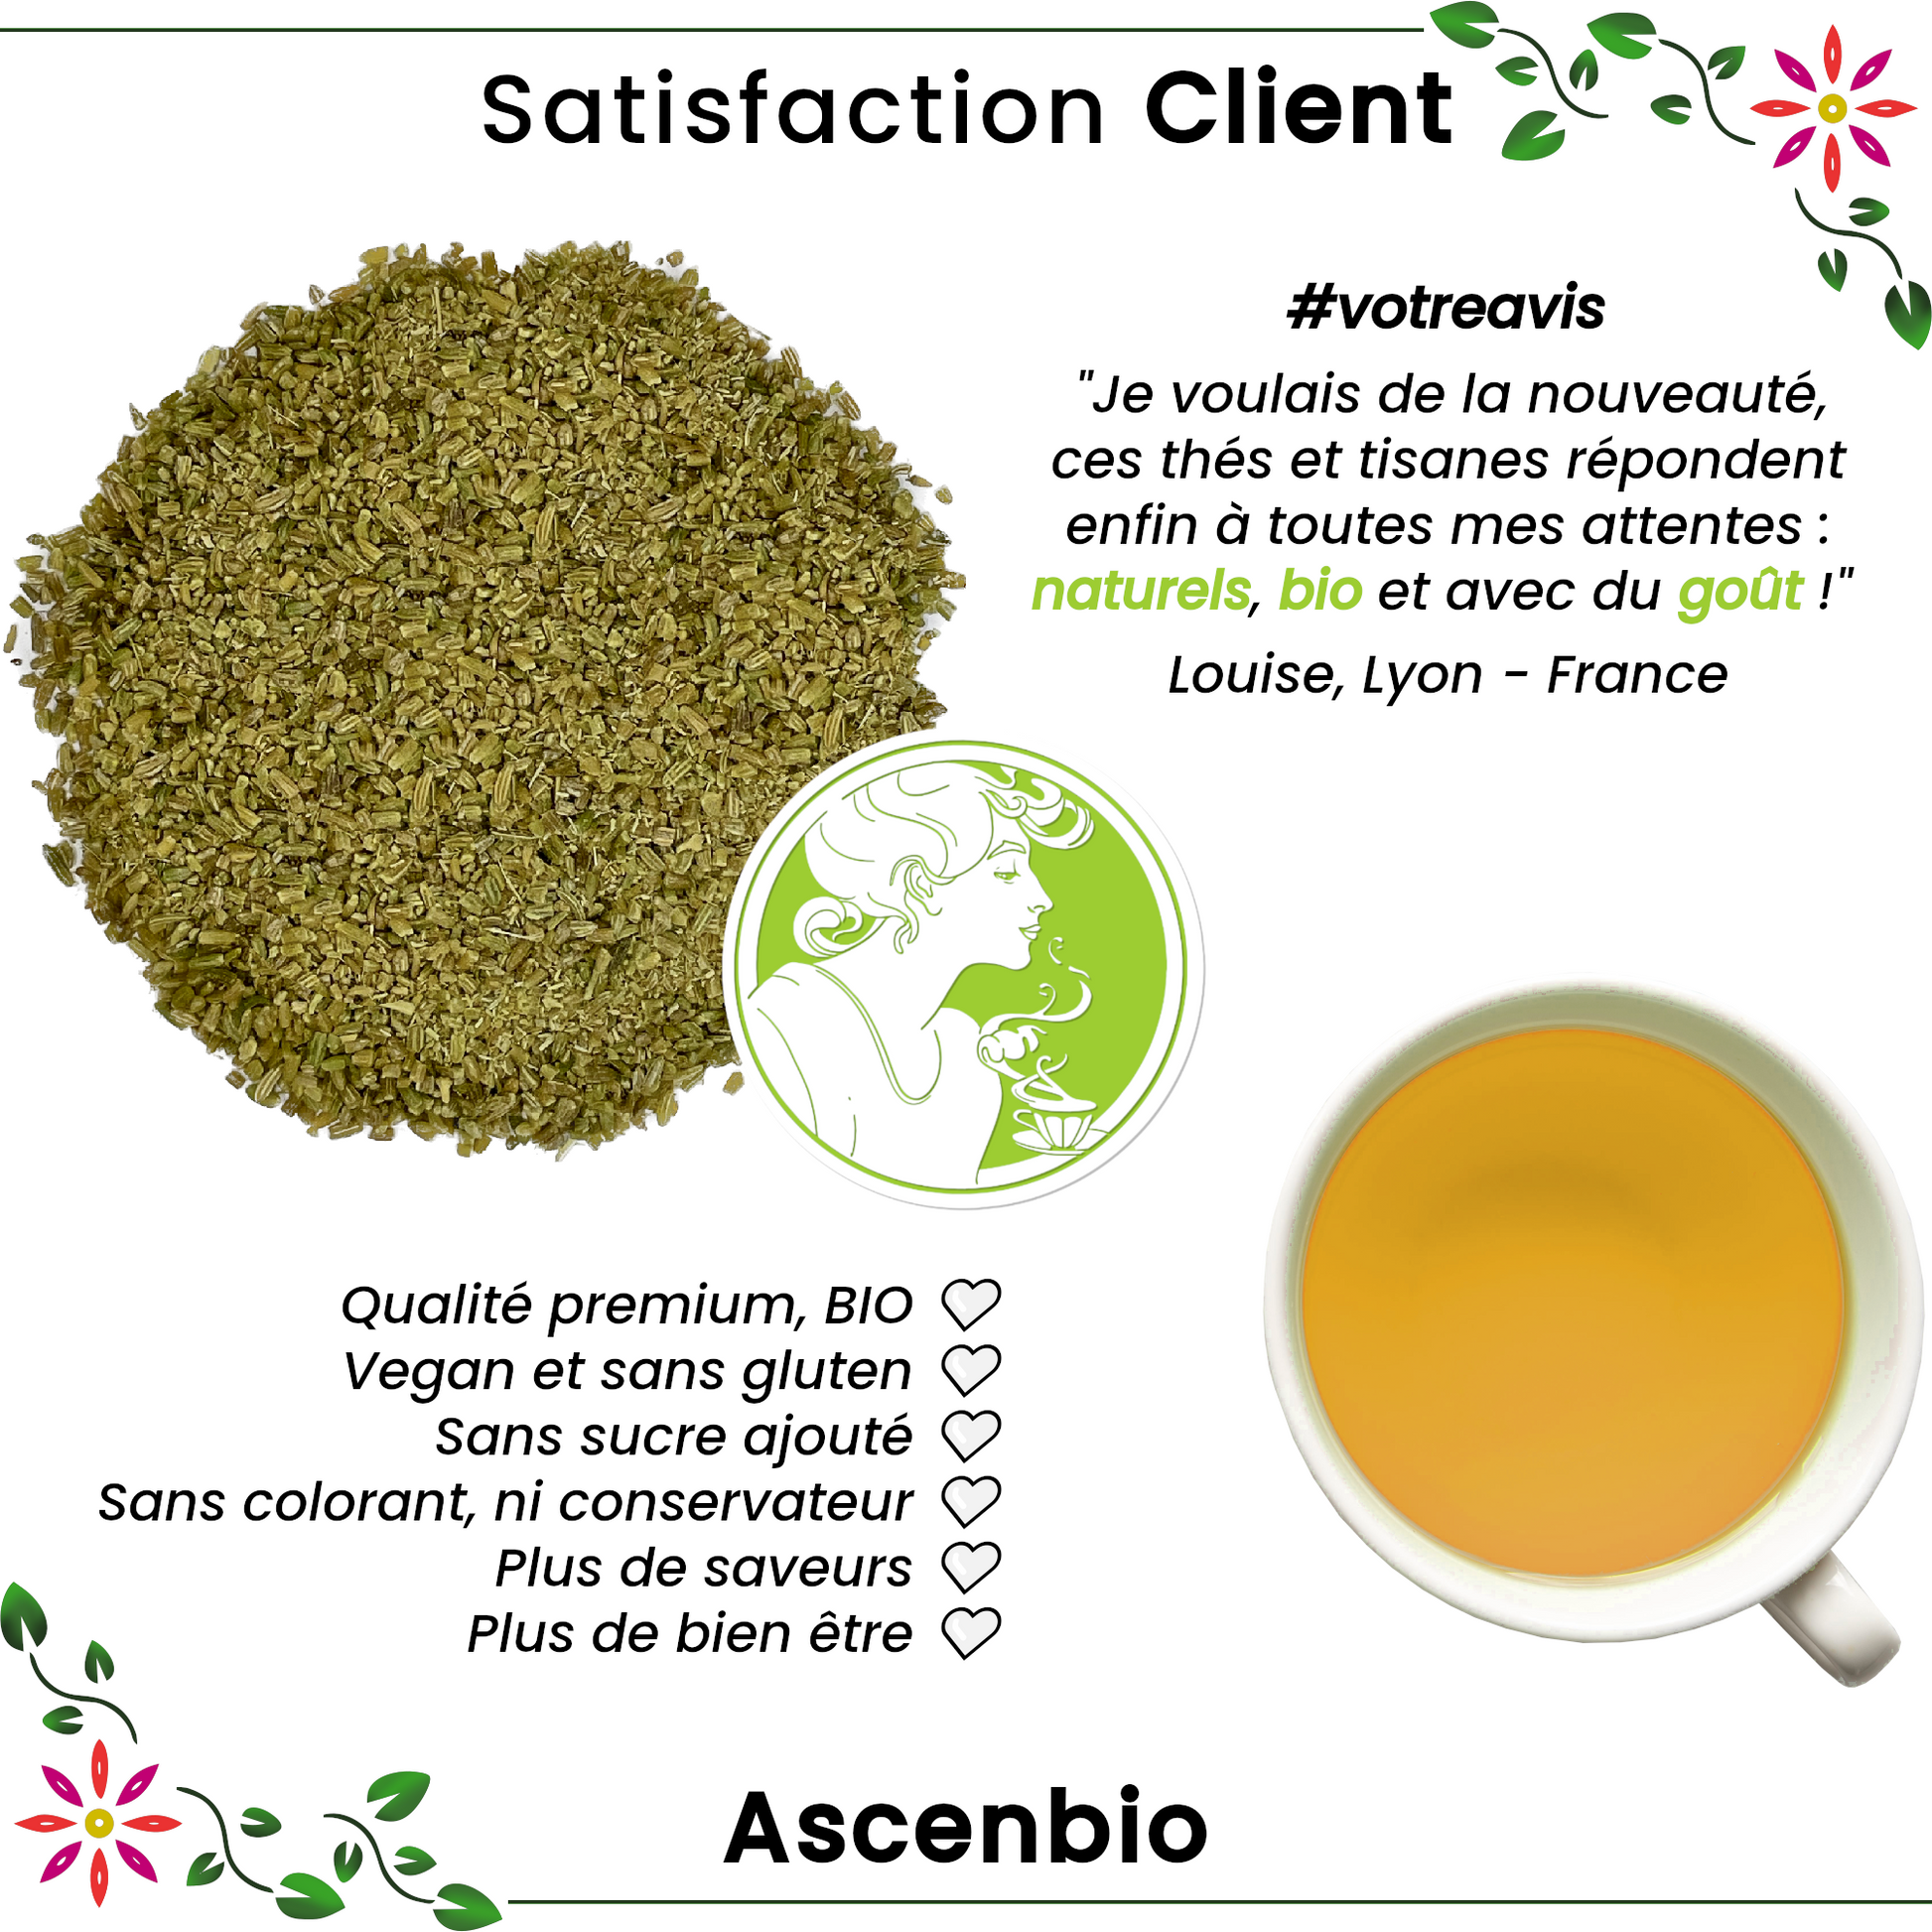 https://ascenbio-thes.com/cdn/shop/files/herbo-grainefenouil-tisane-satisfaction_30f56a8f-feb8-4067-bbd0-2719fe14c5e9.png?v=1700139473&width=1946